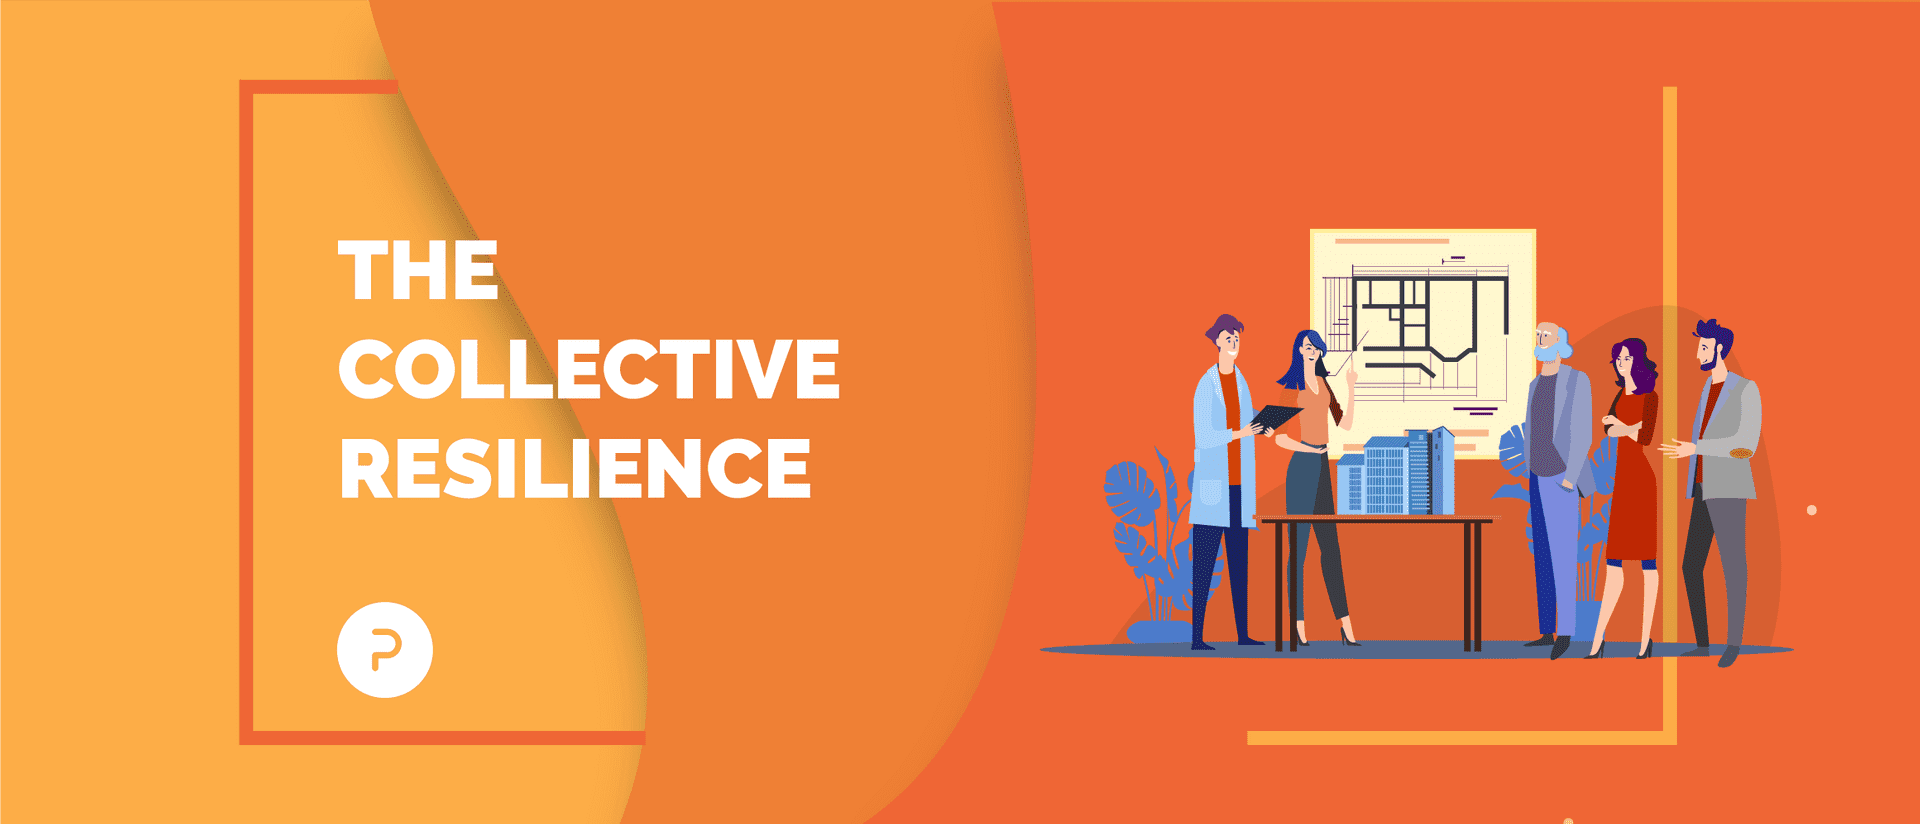 The Collective Resilience: Connecting and Collaborating with Your Team